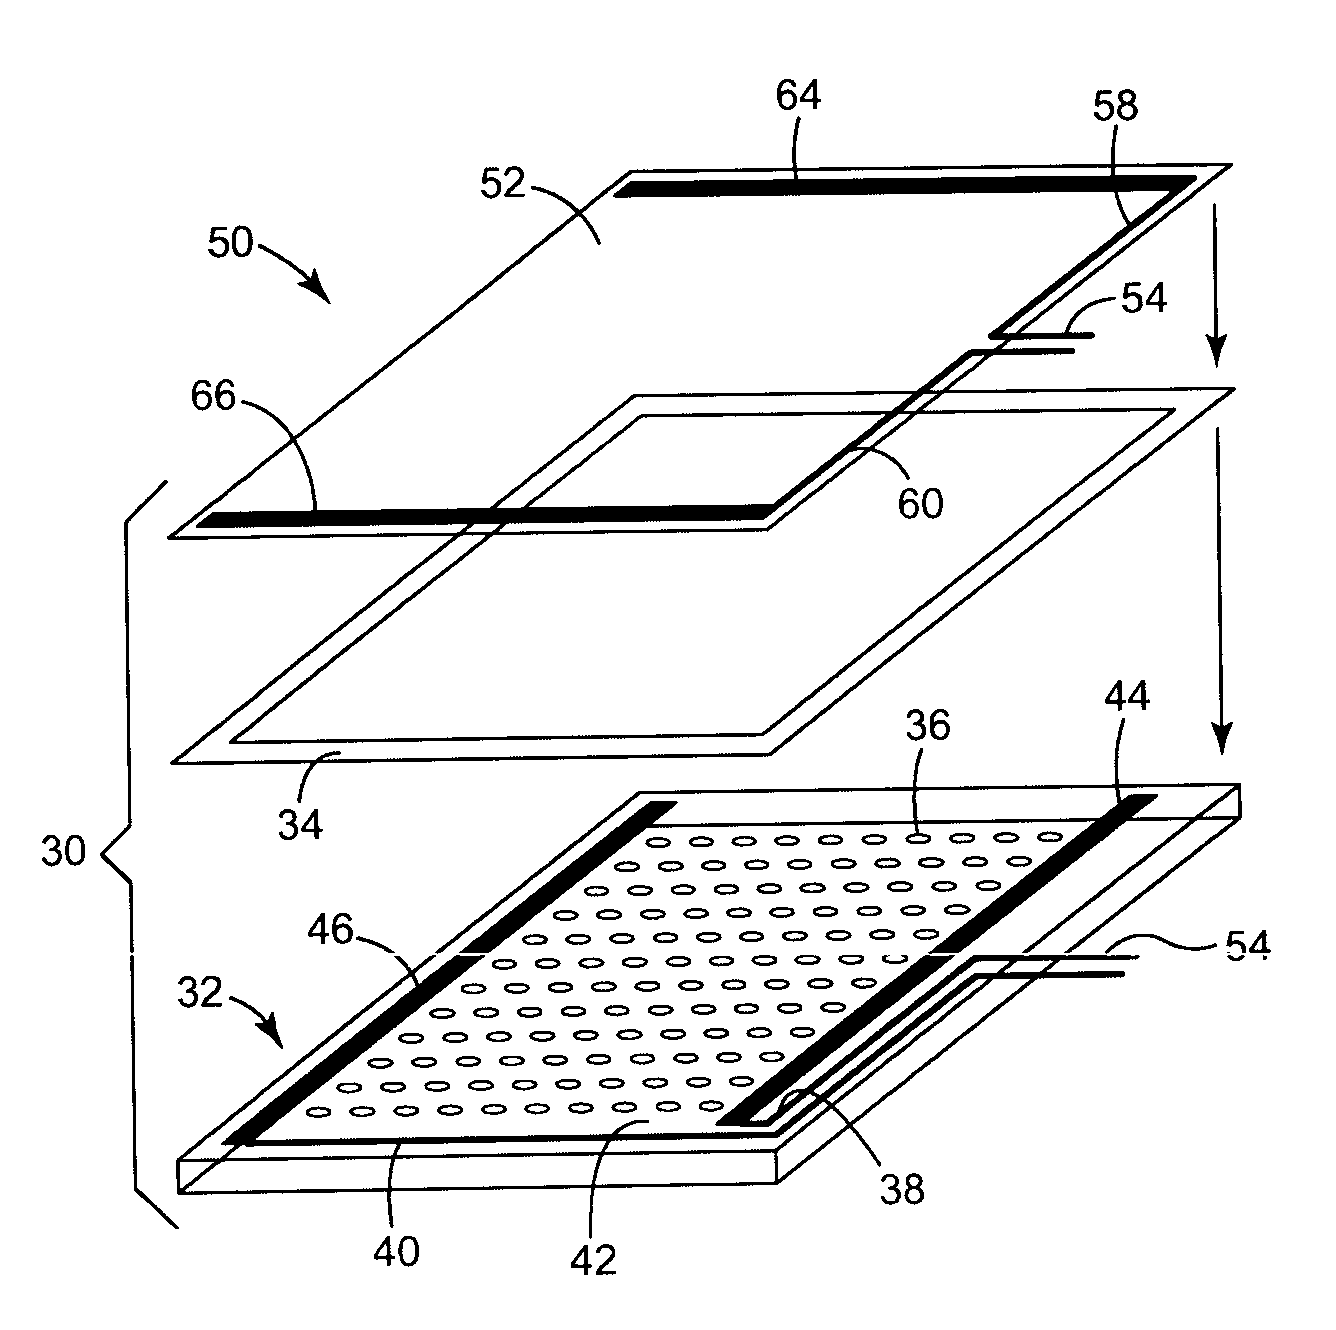 Resistive touch screen incorporating conductive polymer